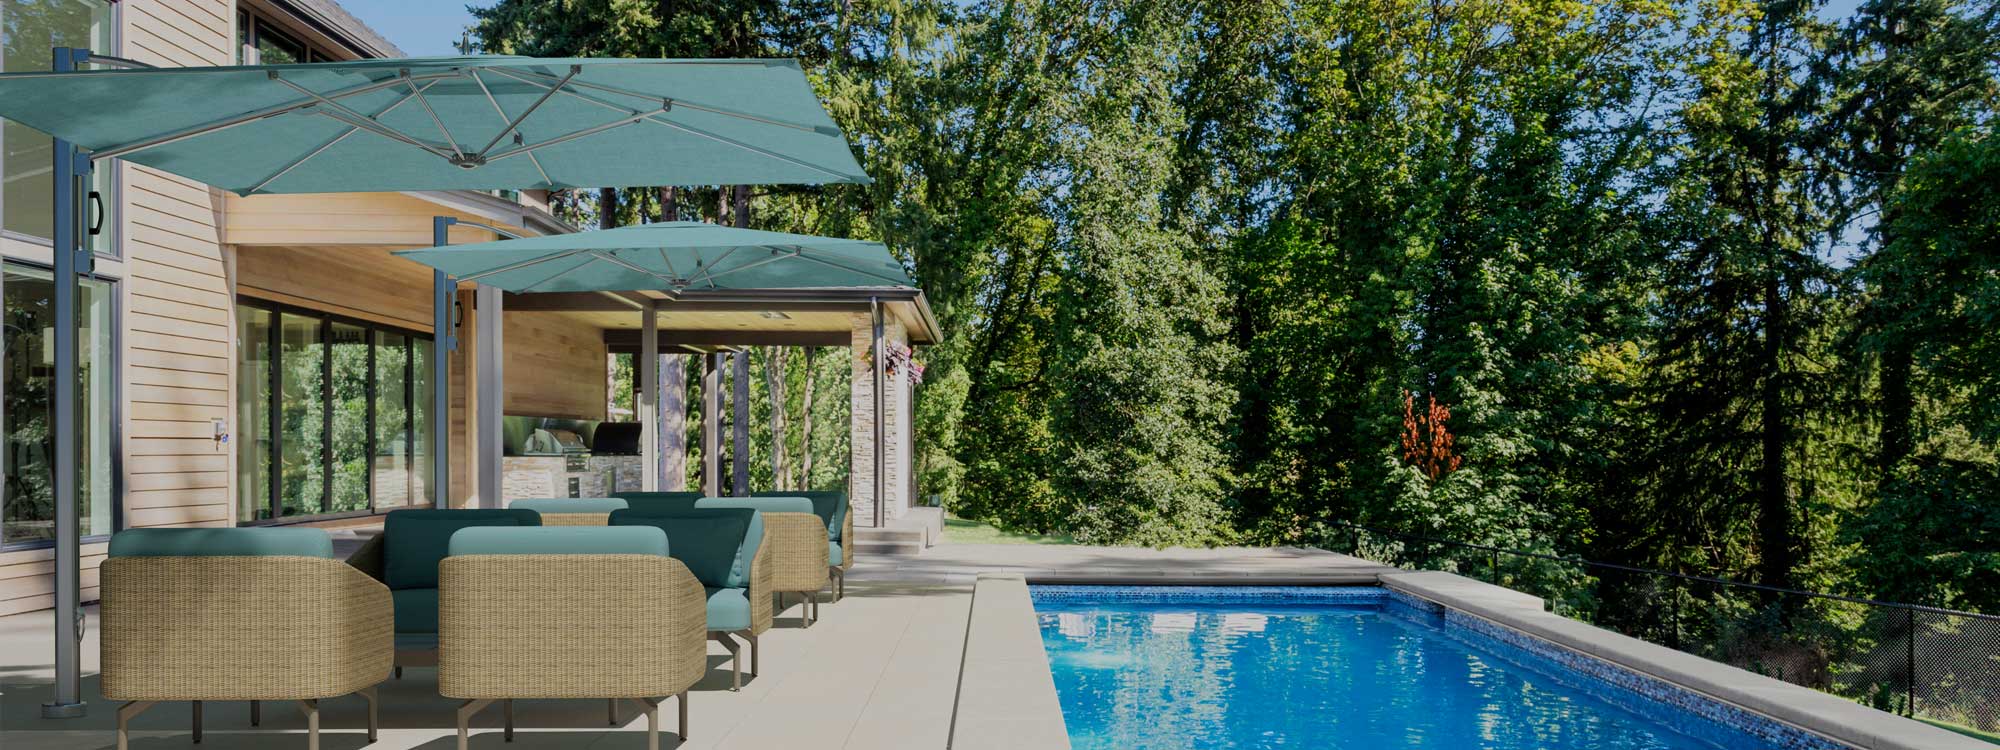 Image of 2 Ocean Master cantilever parasols with green canopies over lounger furniture on terrace, with swimming pool to side, surrounded by woodland